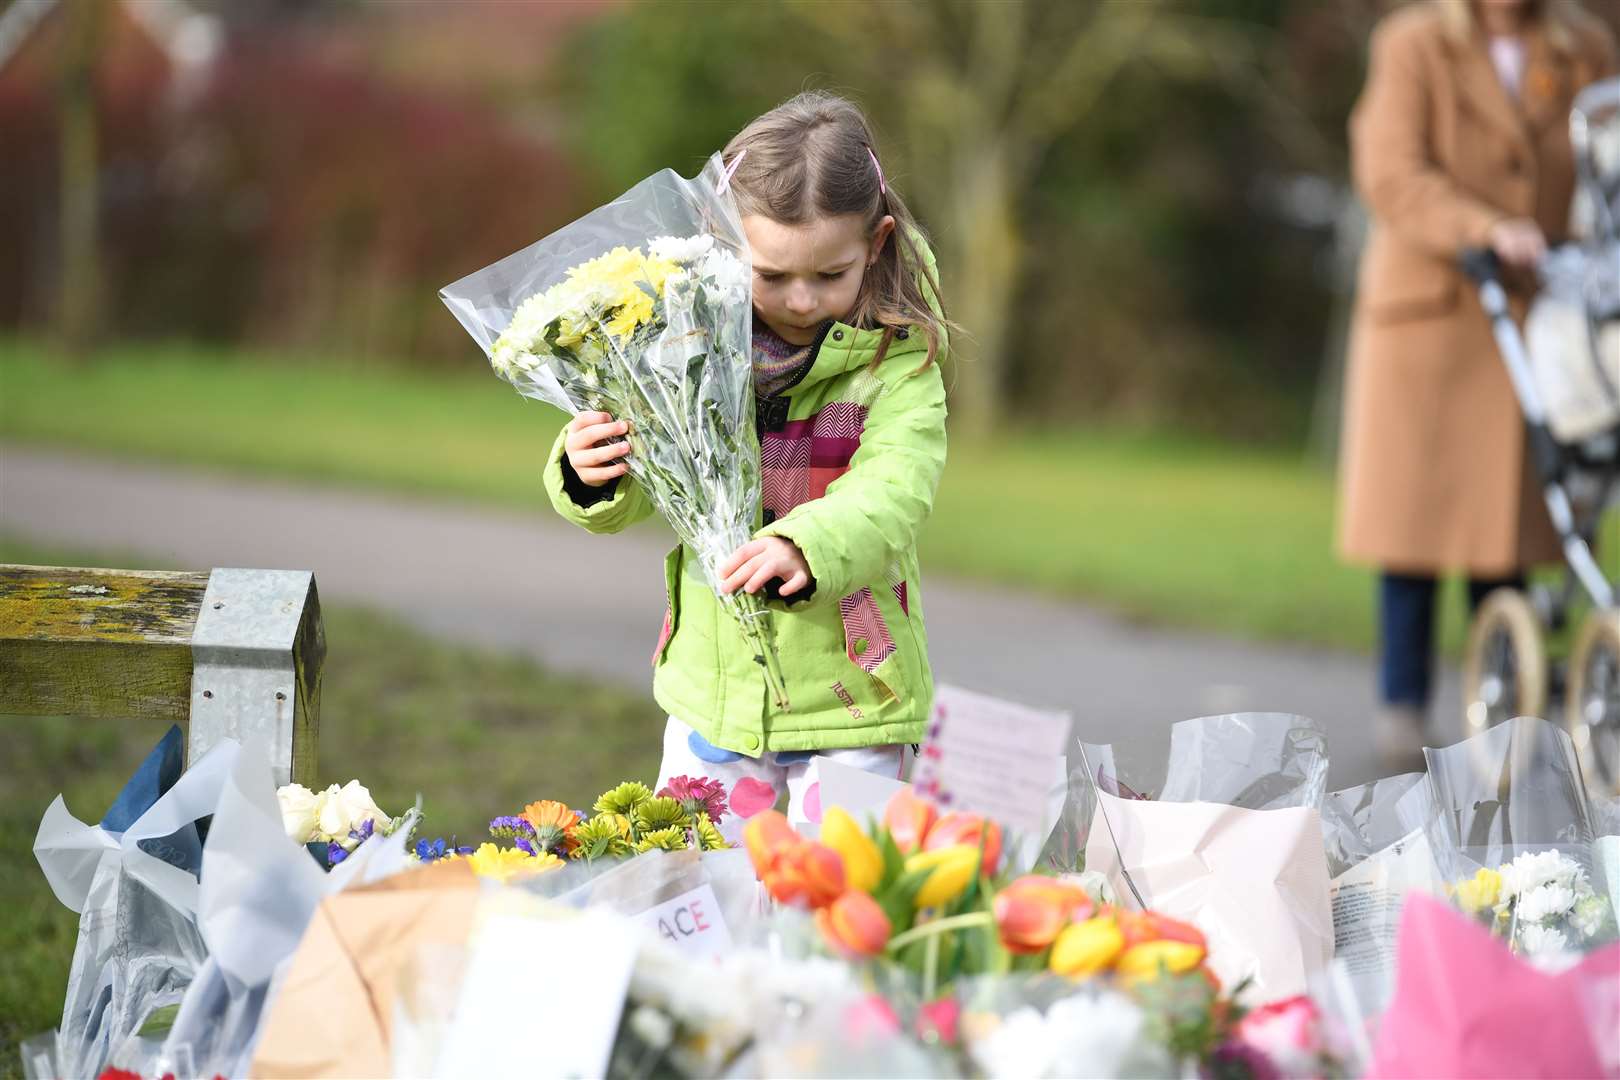 Noelle Simmons, four, leaves a floral tribute outside the home of Captain Sir Tom Moore in Marston Moretaine, Bedfordshire (Kirsty O’Connor/PA)